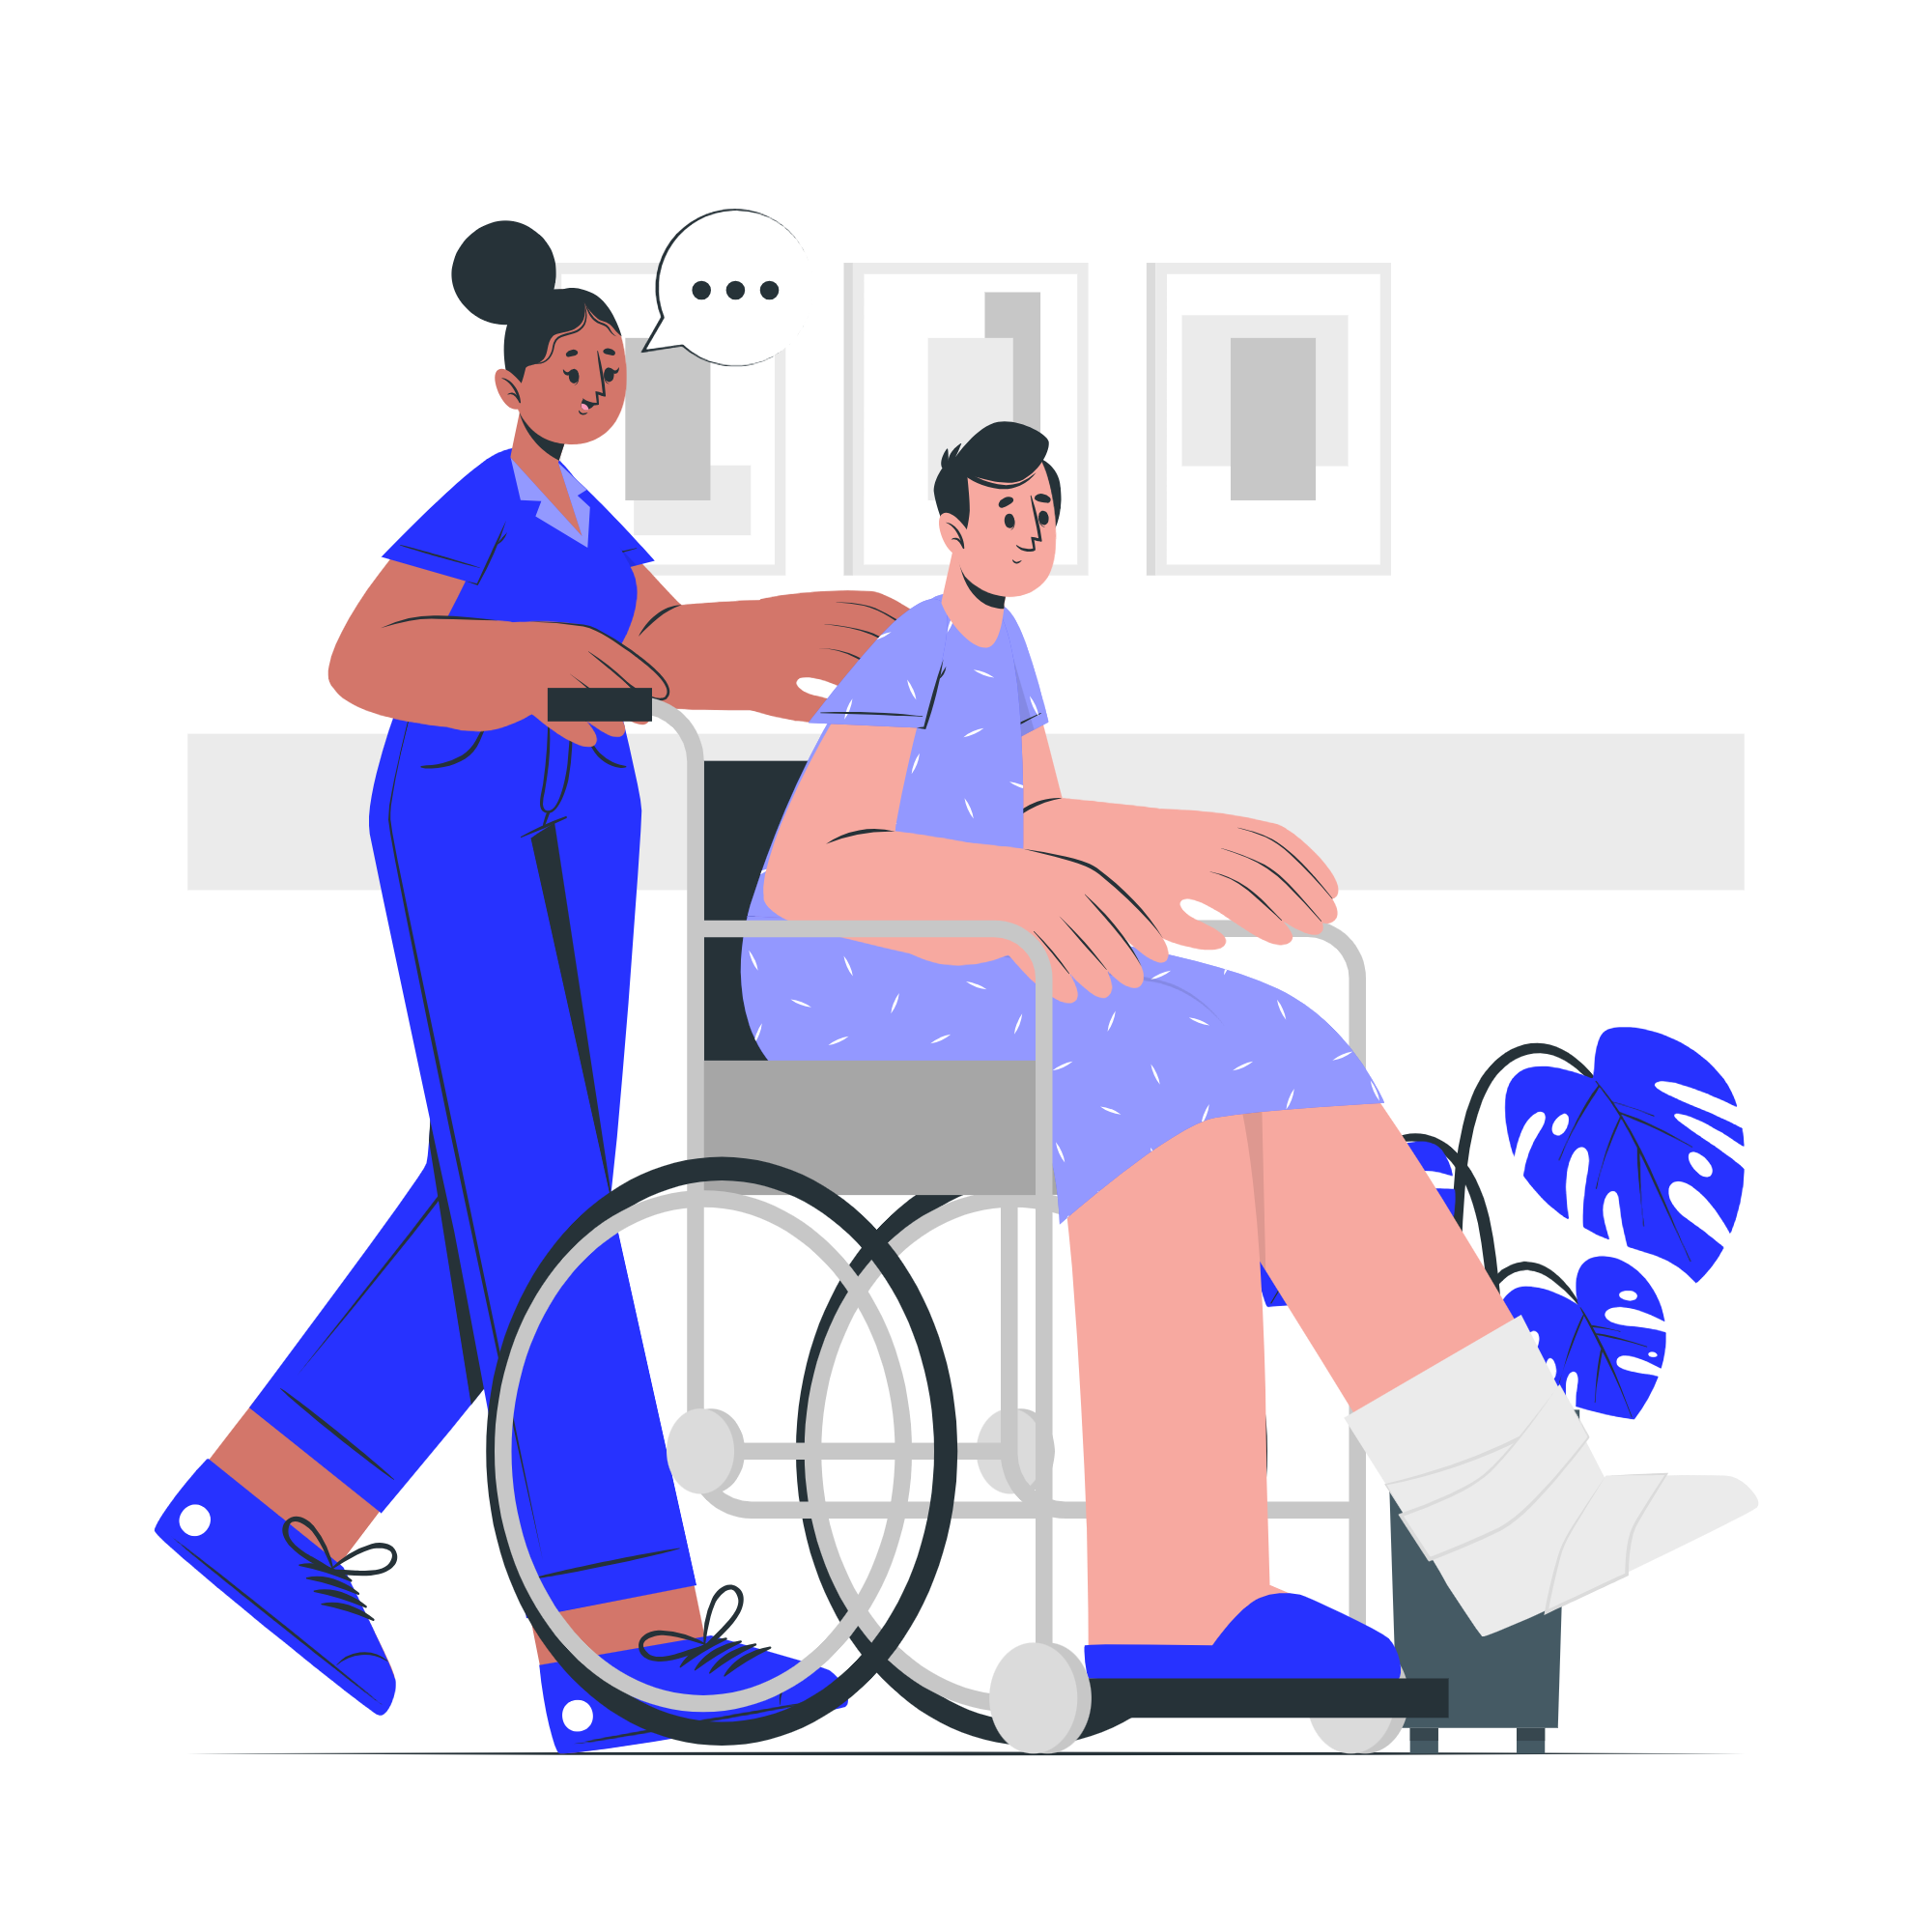 Image of a assisted scene with a person in a wheelchair accompanied by a caretaker, emphasizing accessibility and patient care.